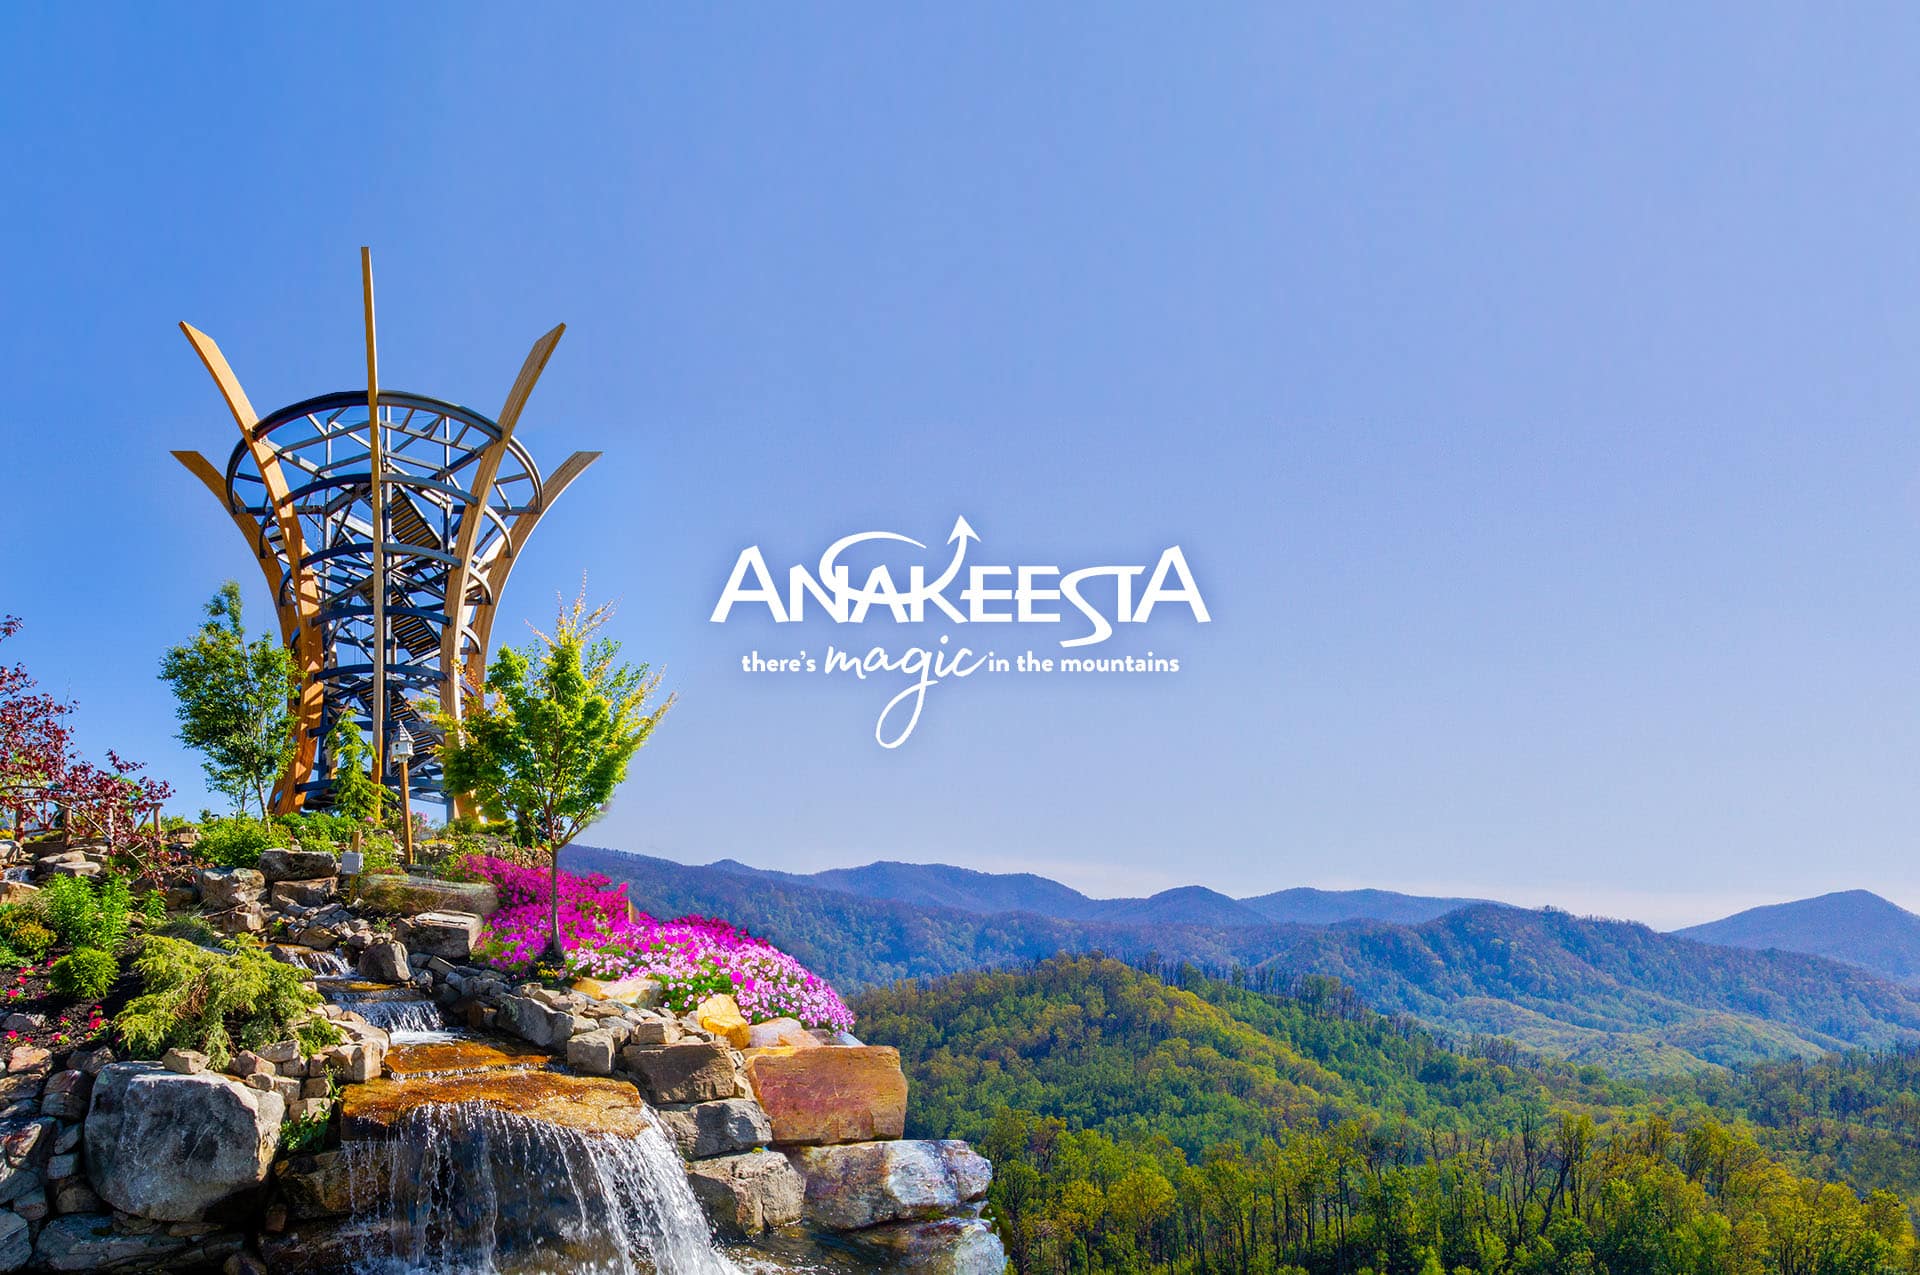 Holiday Events at Anakeesta!